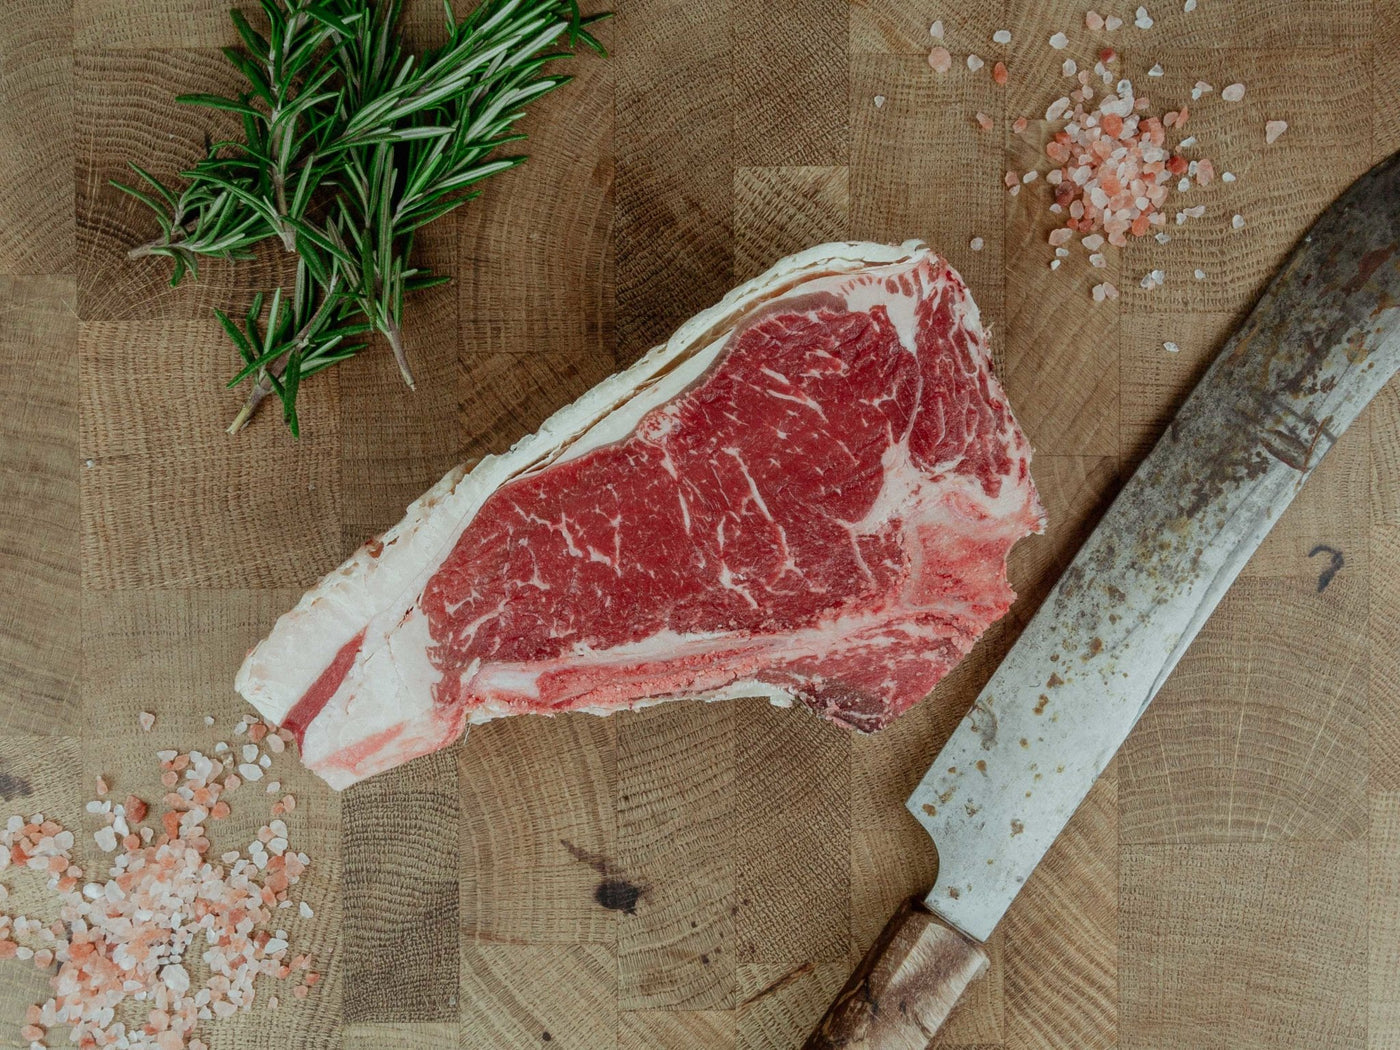 Grass Fed, Dry-Aged Bone In Sirloin - Thomas Joseph Butchery - Ethical Dry-Aged Meat The Best Steak UK Thomas Joseph Butchery